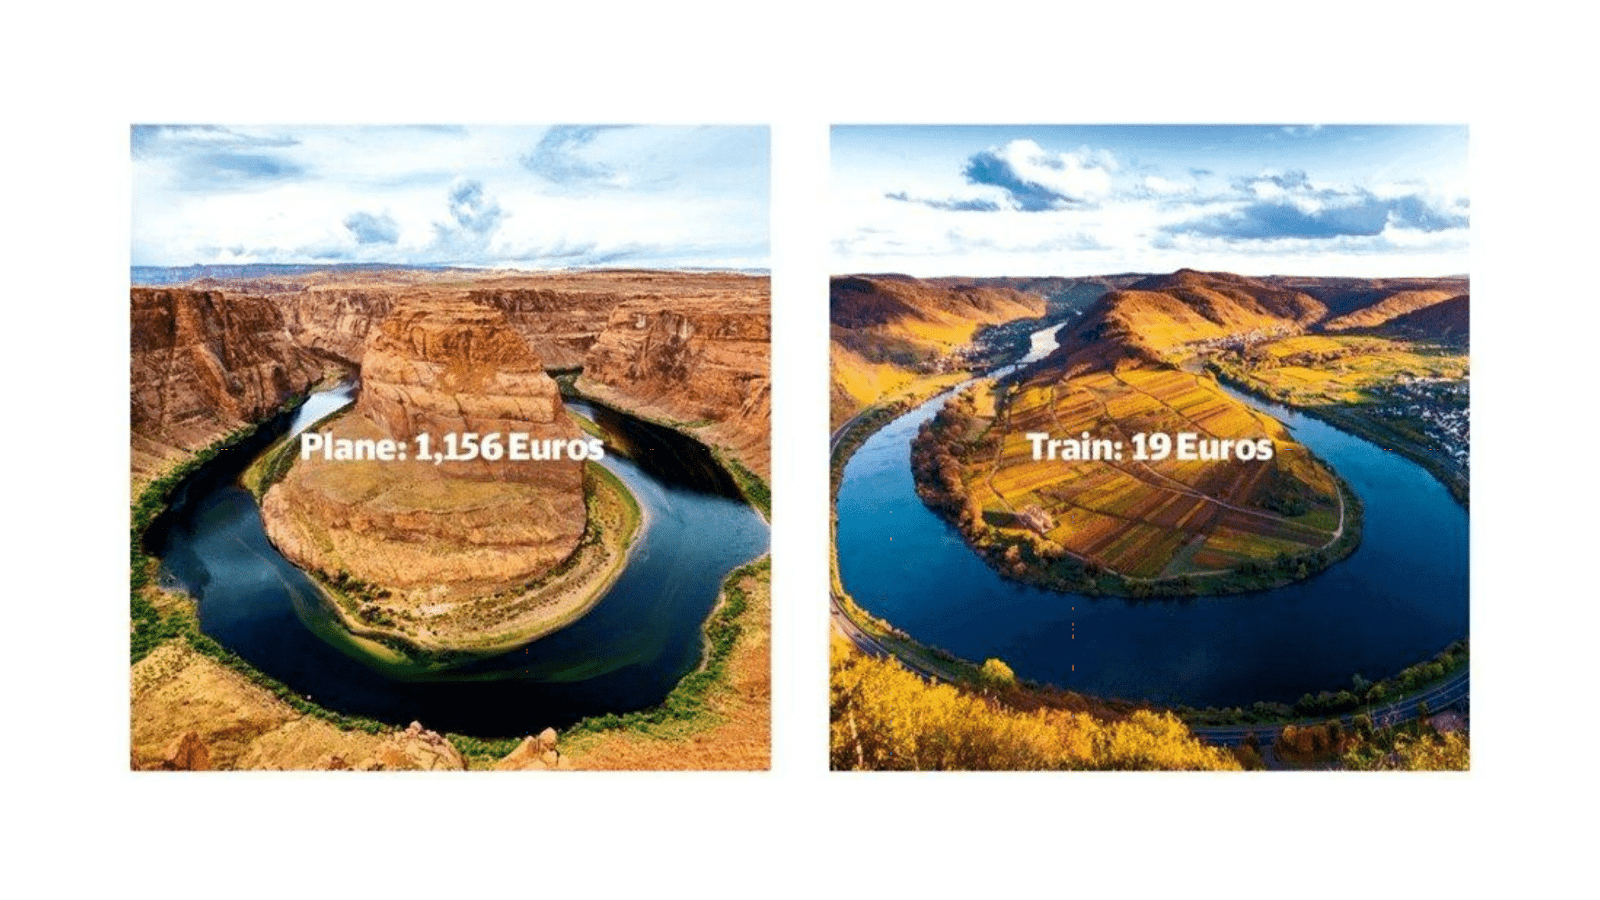 Images of two similar-looking destinations.  one reads "Plane: 1,156 Euros" the other reads "Train: 19 Euros".